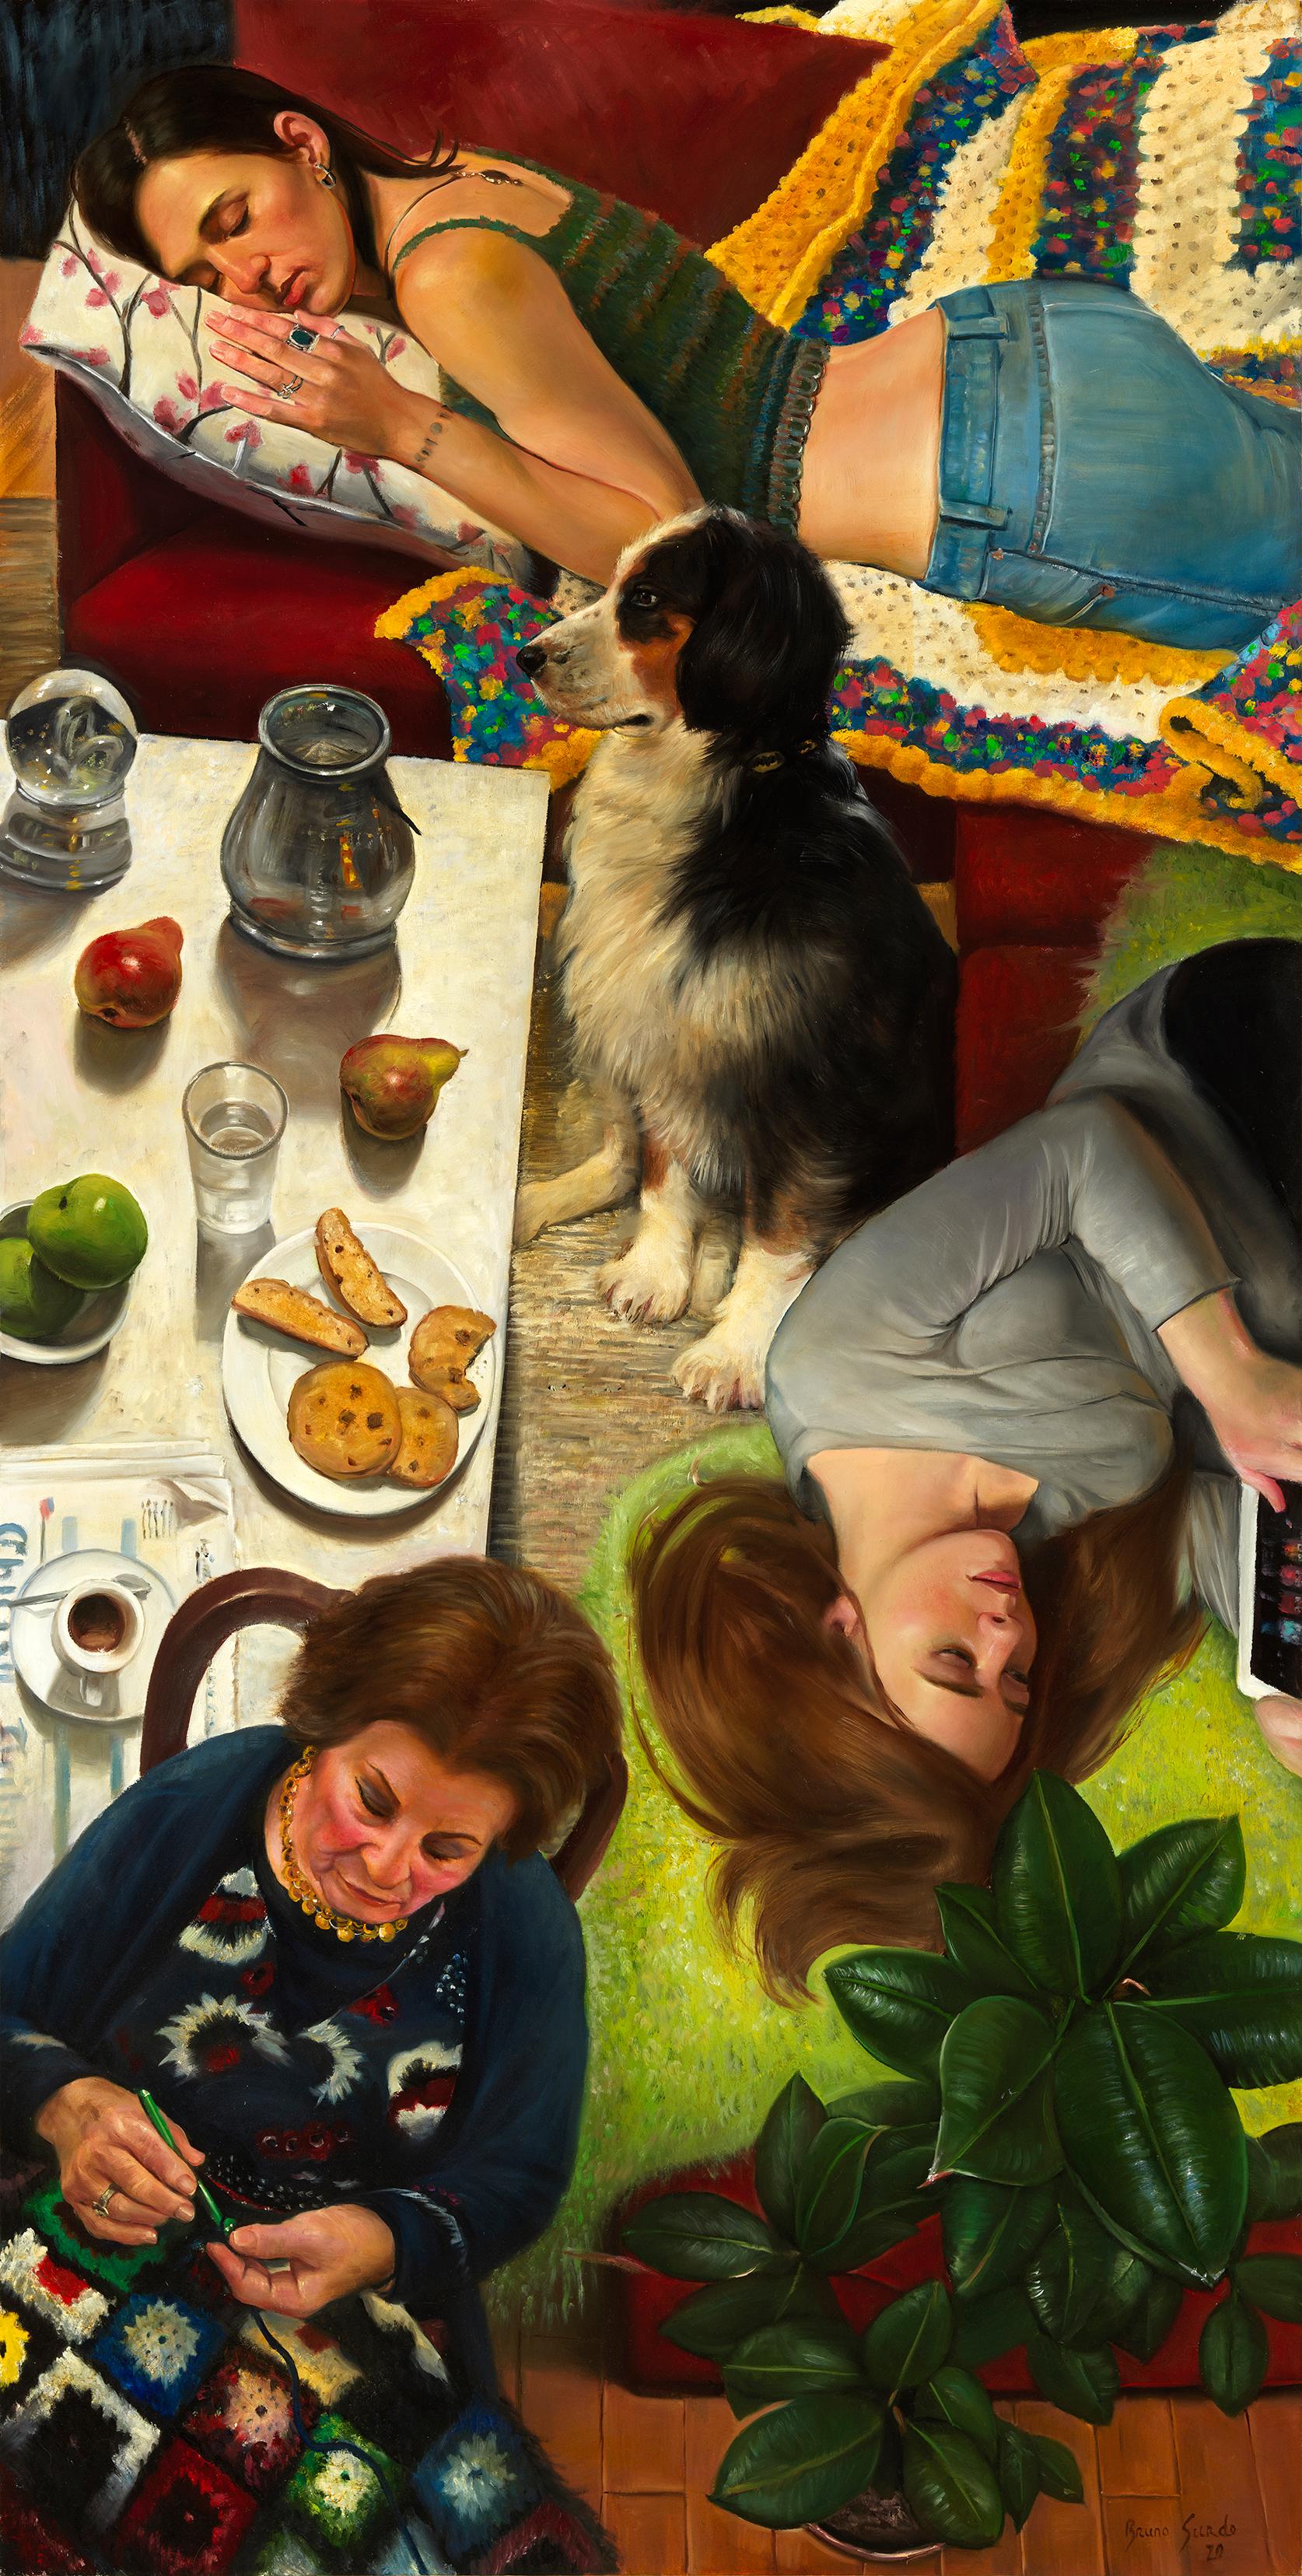  Inner Bliss, Three Women and a Dog, Interior Scene, Bright Colors Oil on Canvas